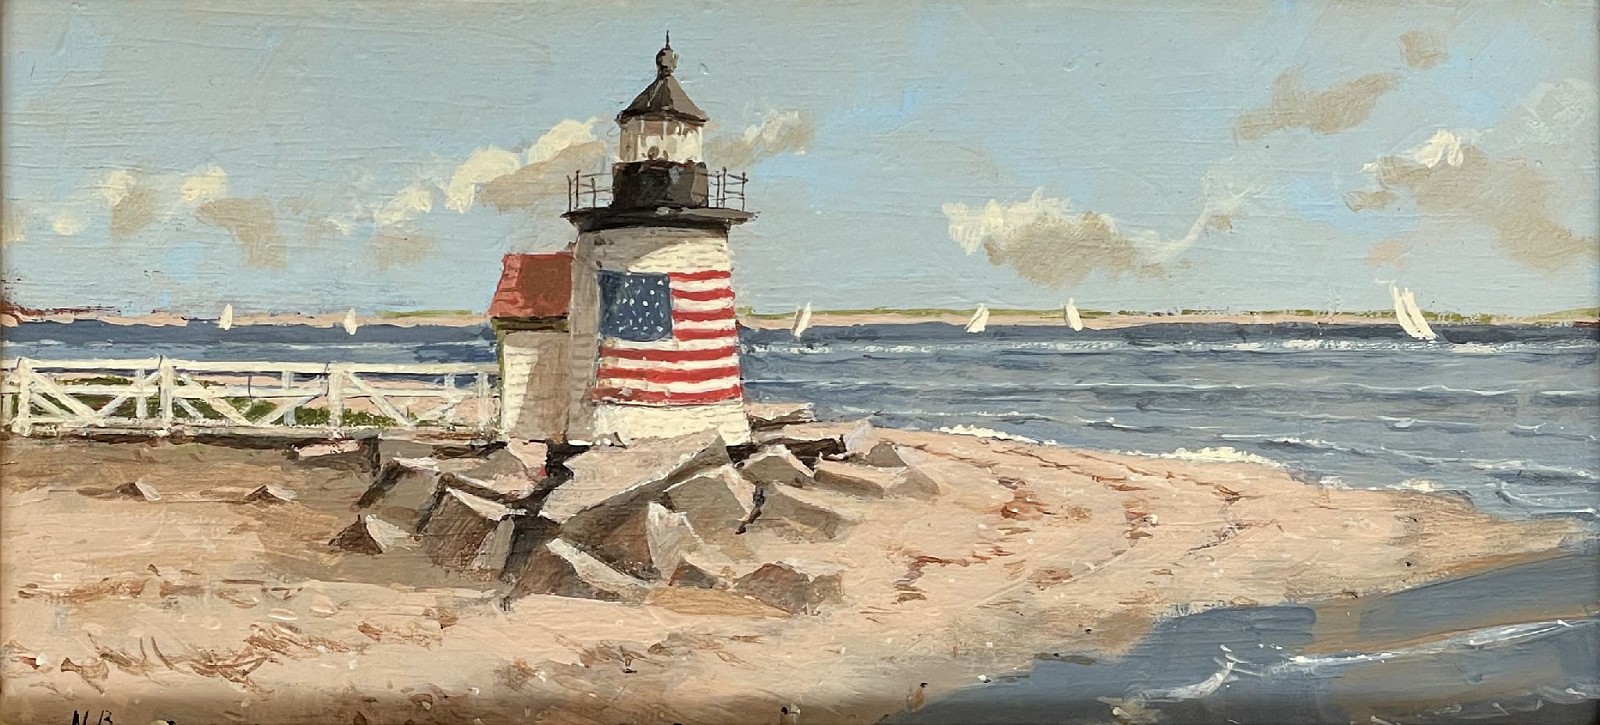 Nicholas Berger, Around the Point, No. 2, 2023
oil on panel, 6 1/8 x 10 3/4 in. (15.6 x 27.3 cm)
NB230502